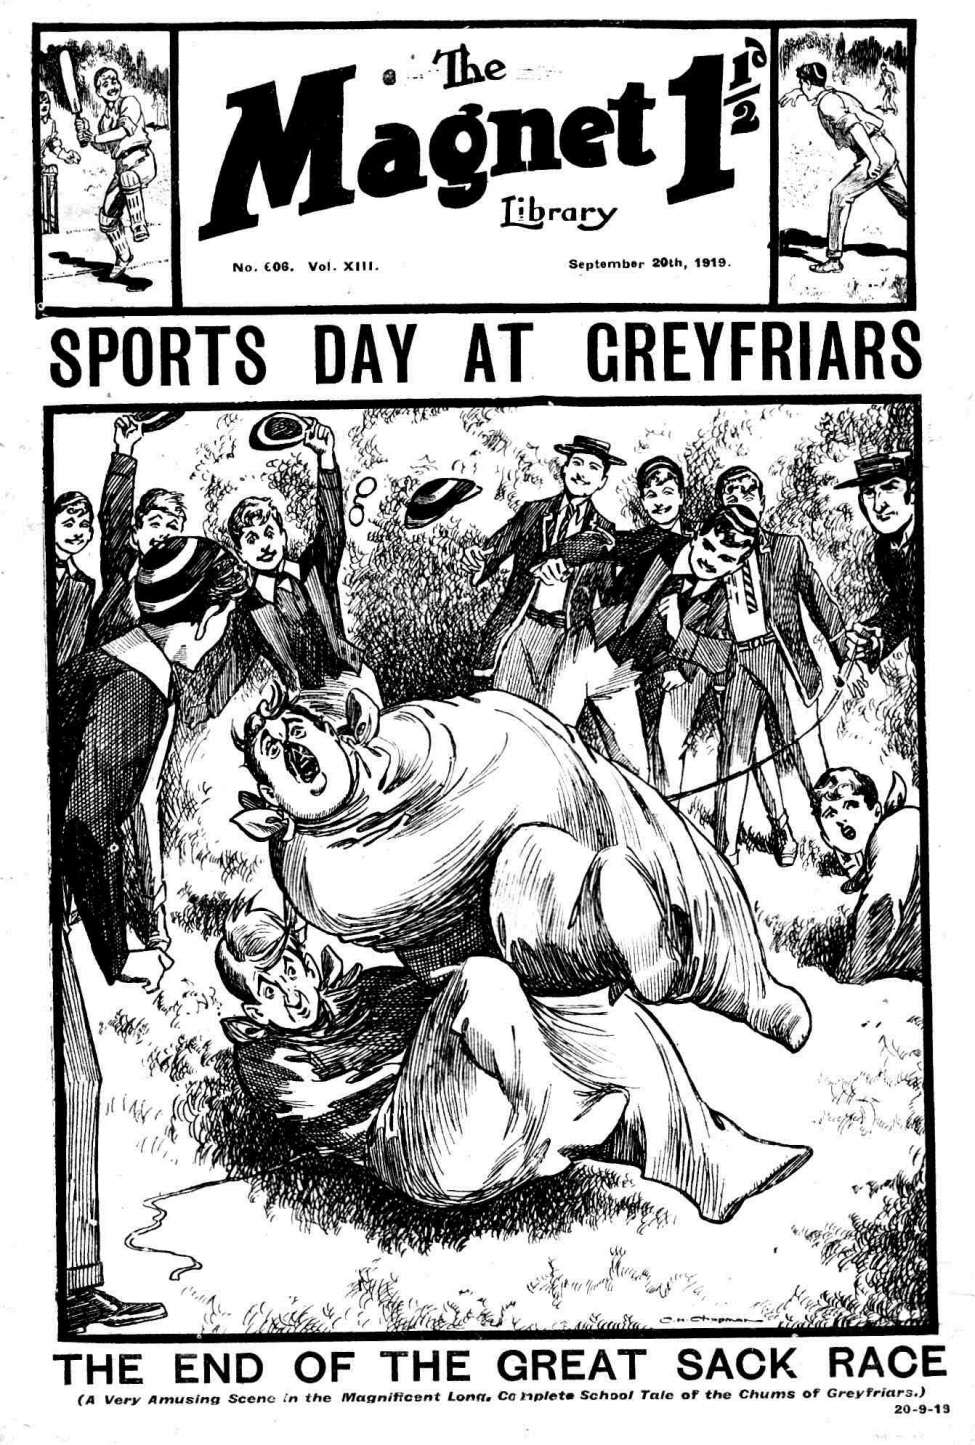 Book Cover For The Magnet 606 - Sports Day at Greyfriars